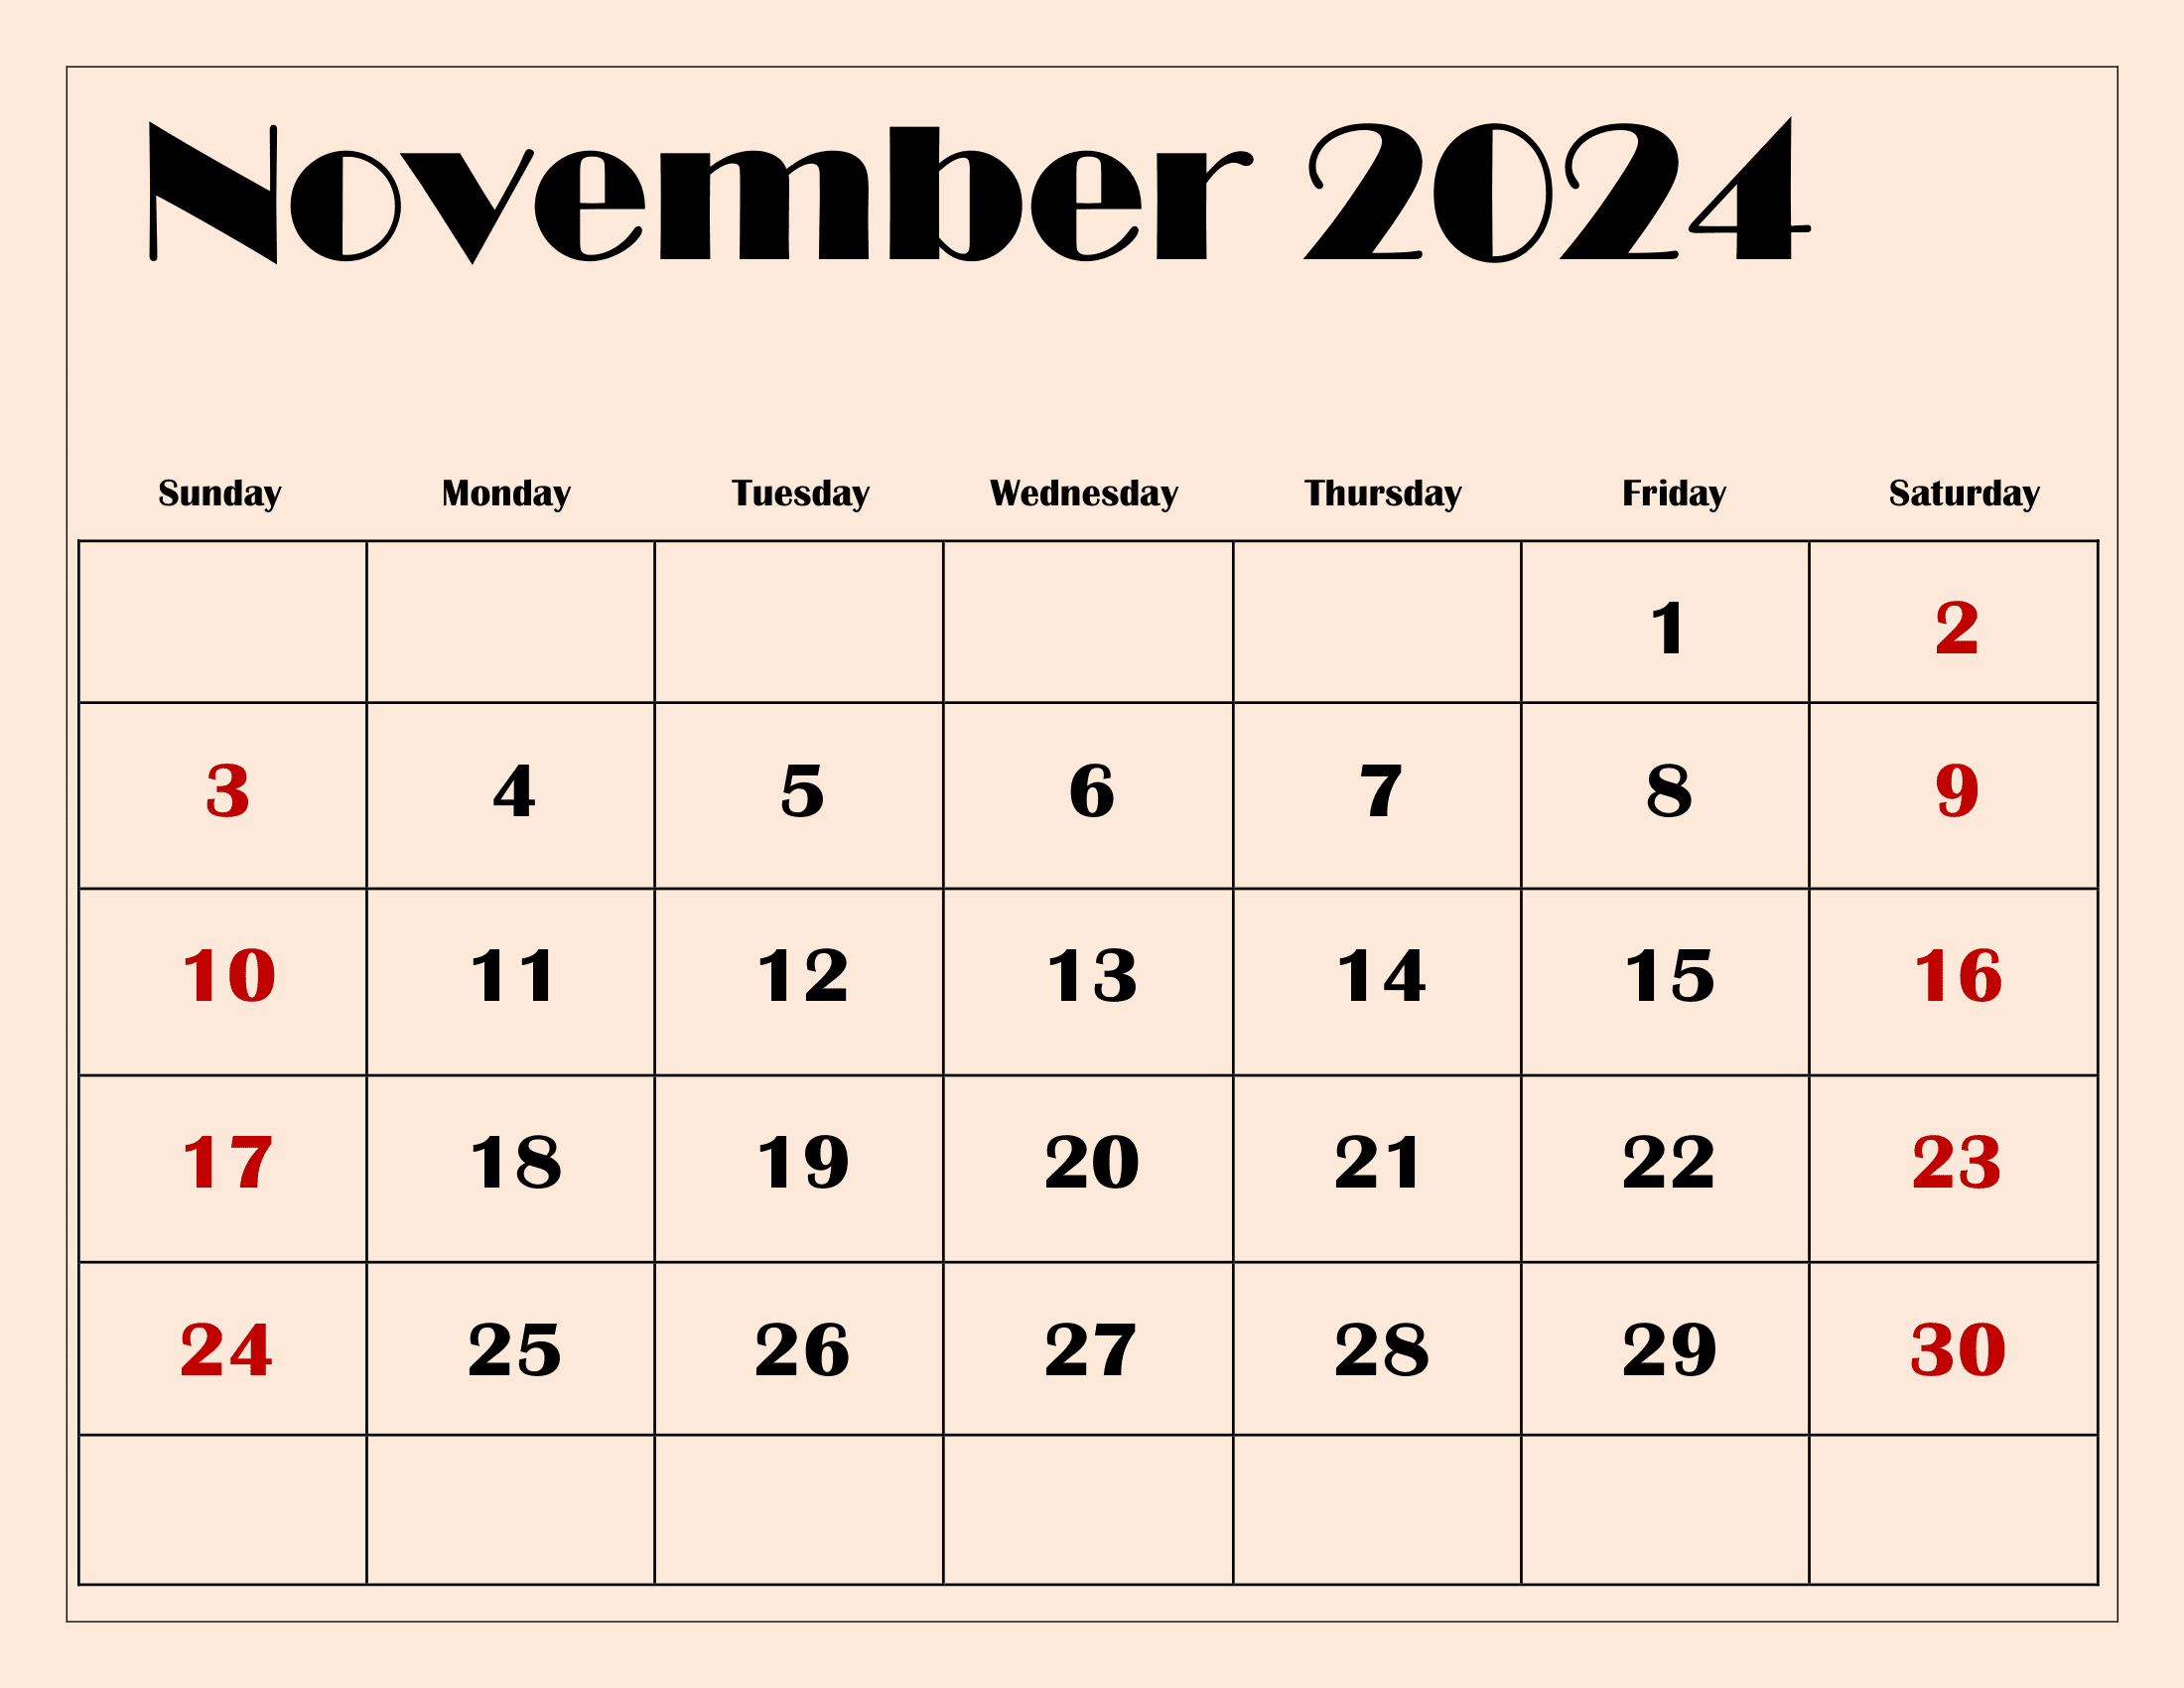 November 2024 Calendar Printable Pdf Template With Holidays within Free Printable Appointment Calendar November 2024 Calendar